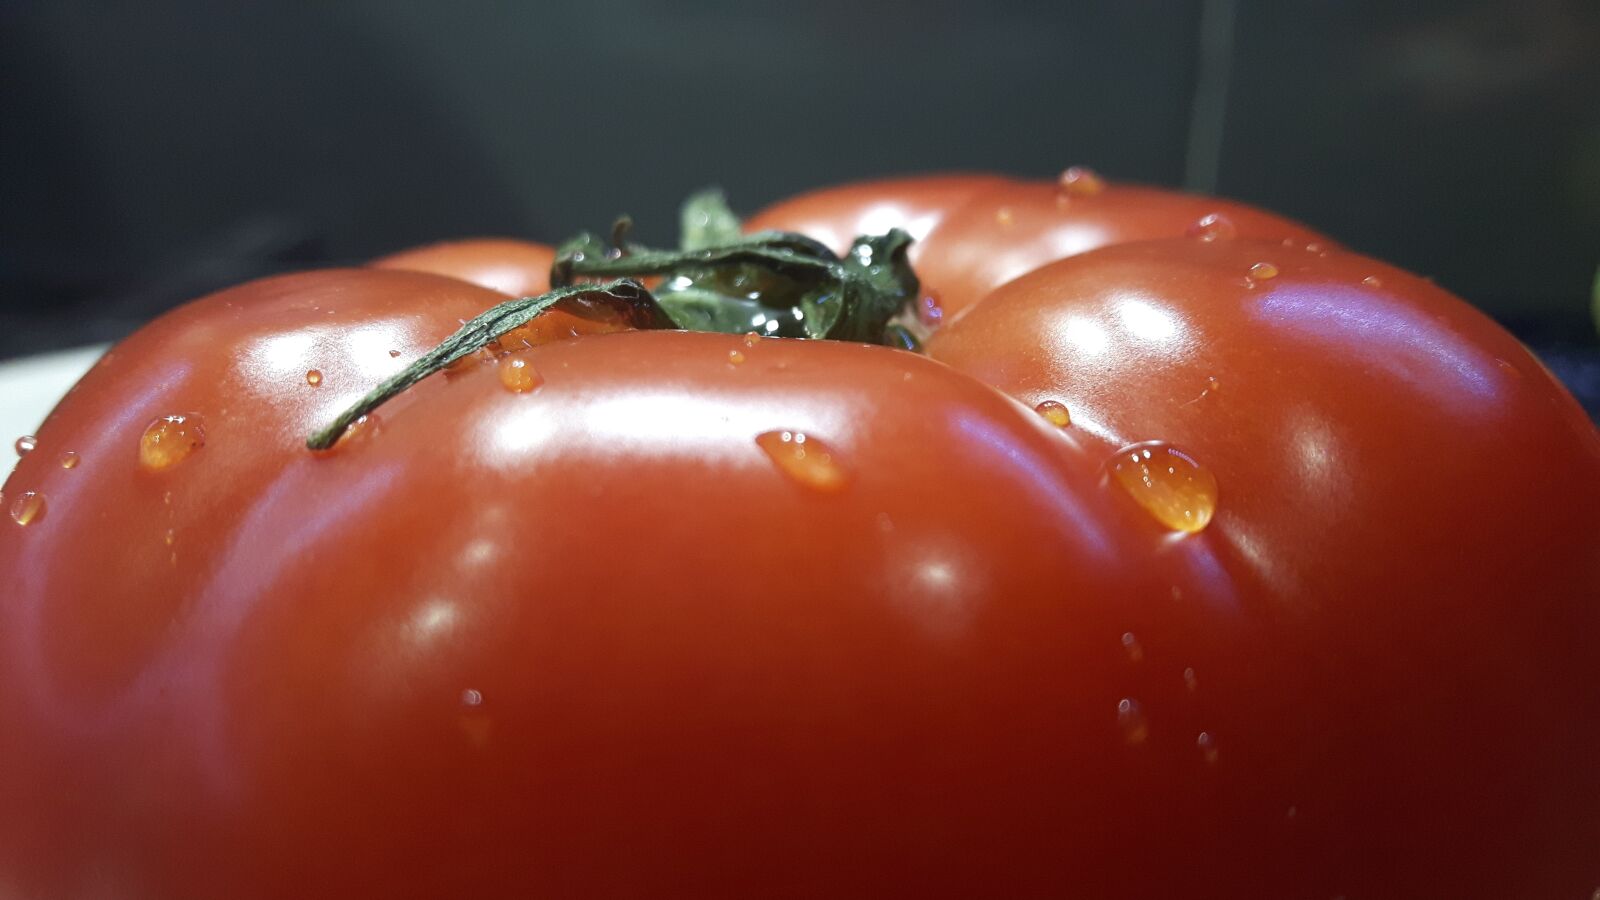 Samsung Galaxy S5 Neo sample photo. Tomato, red, tomatoes photography